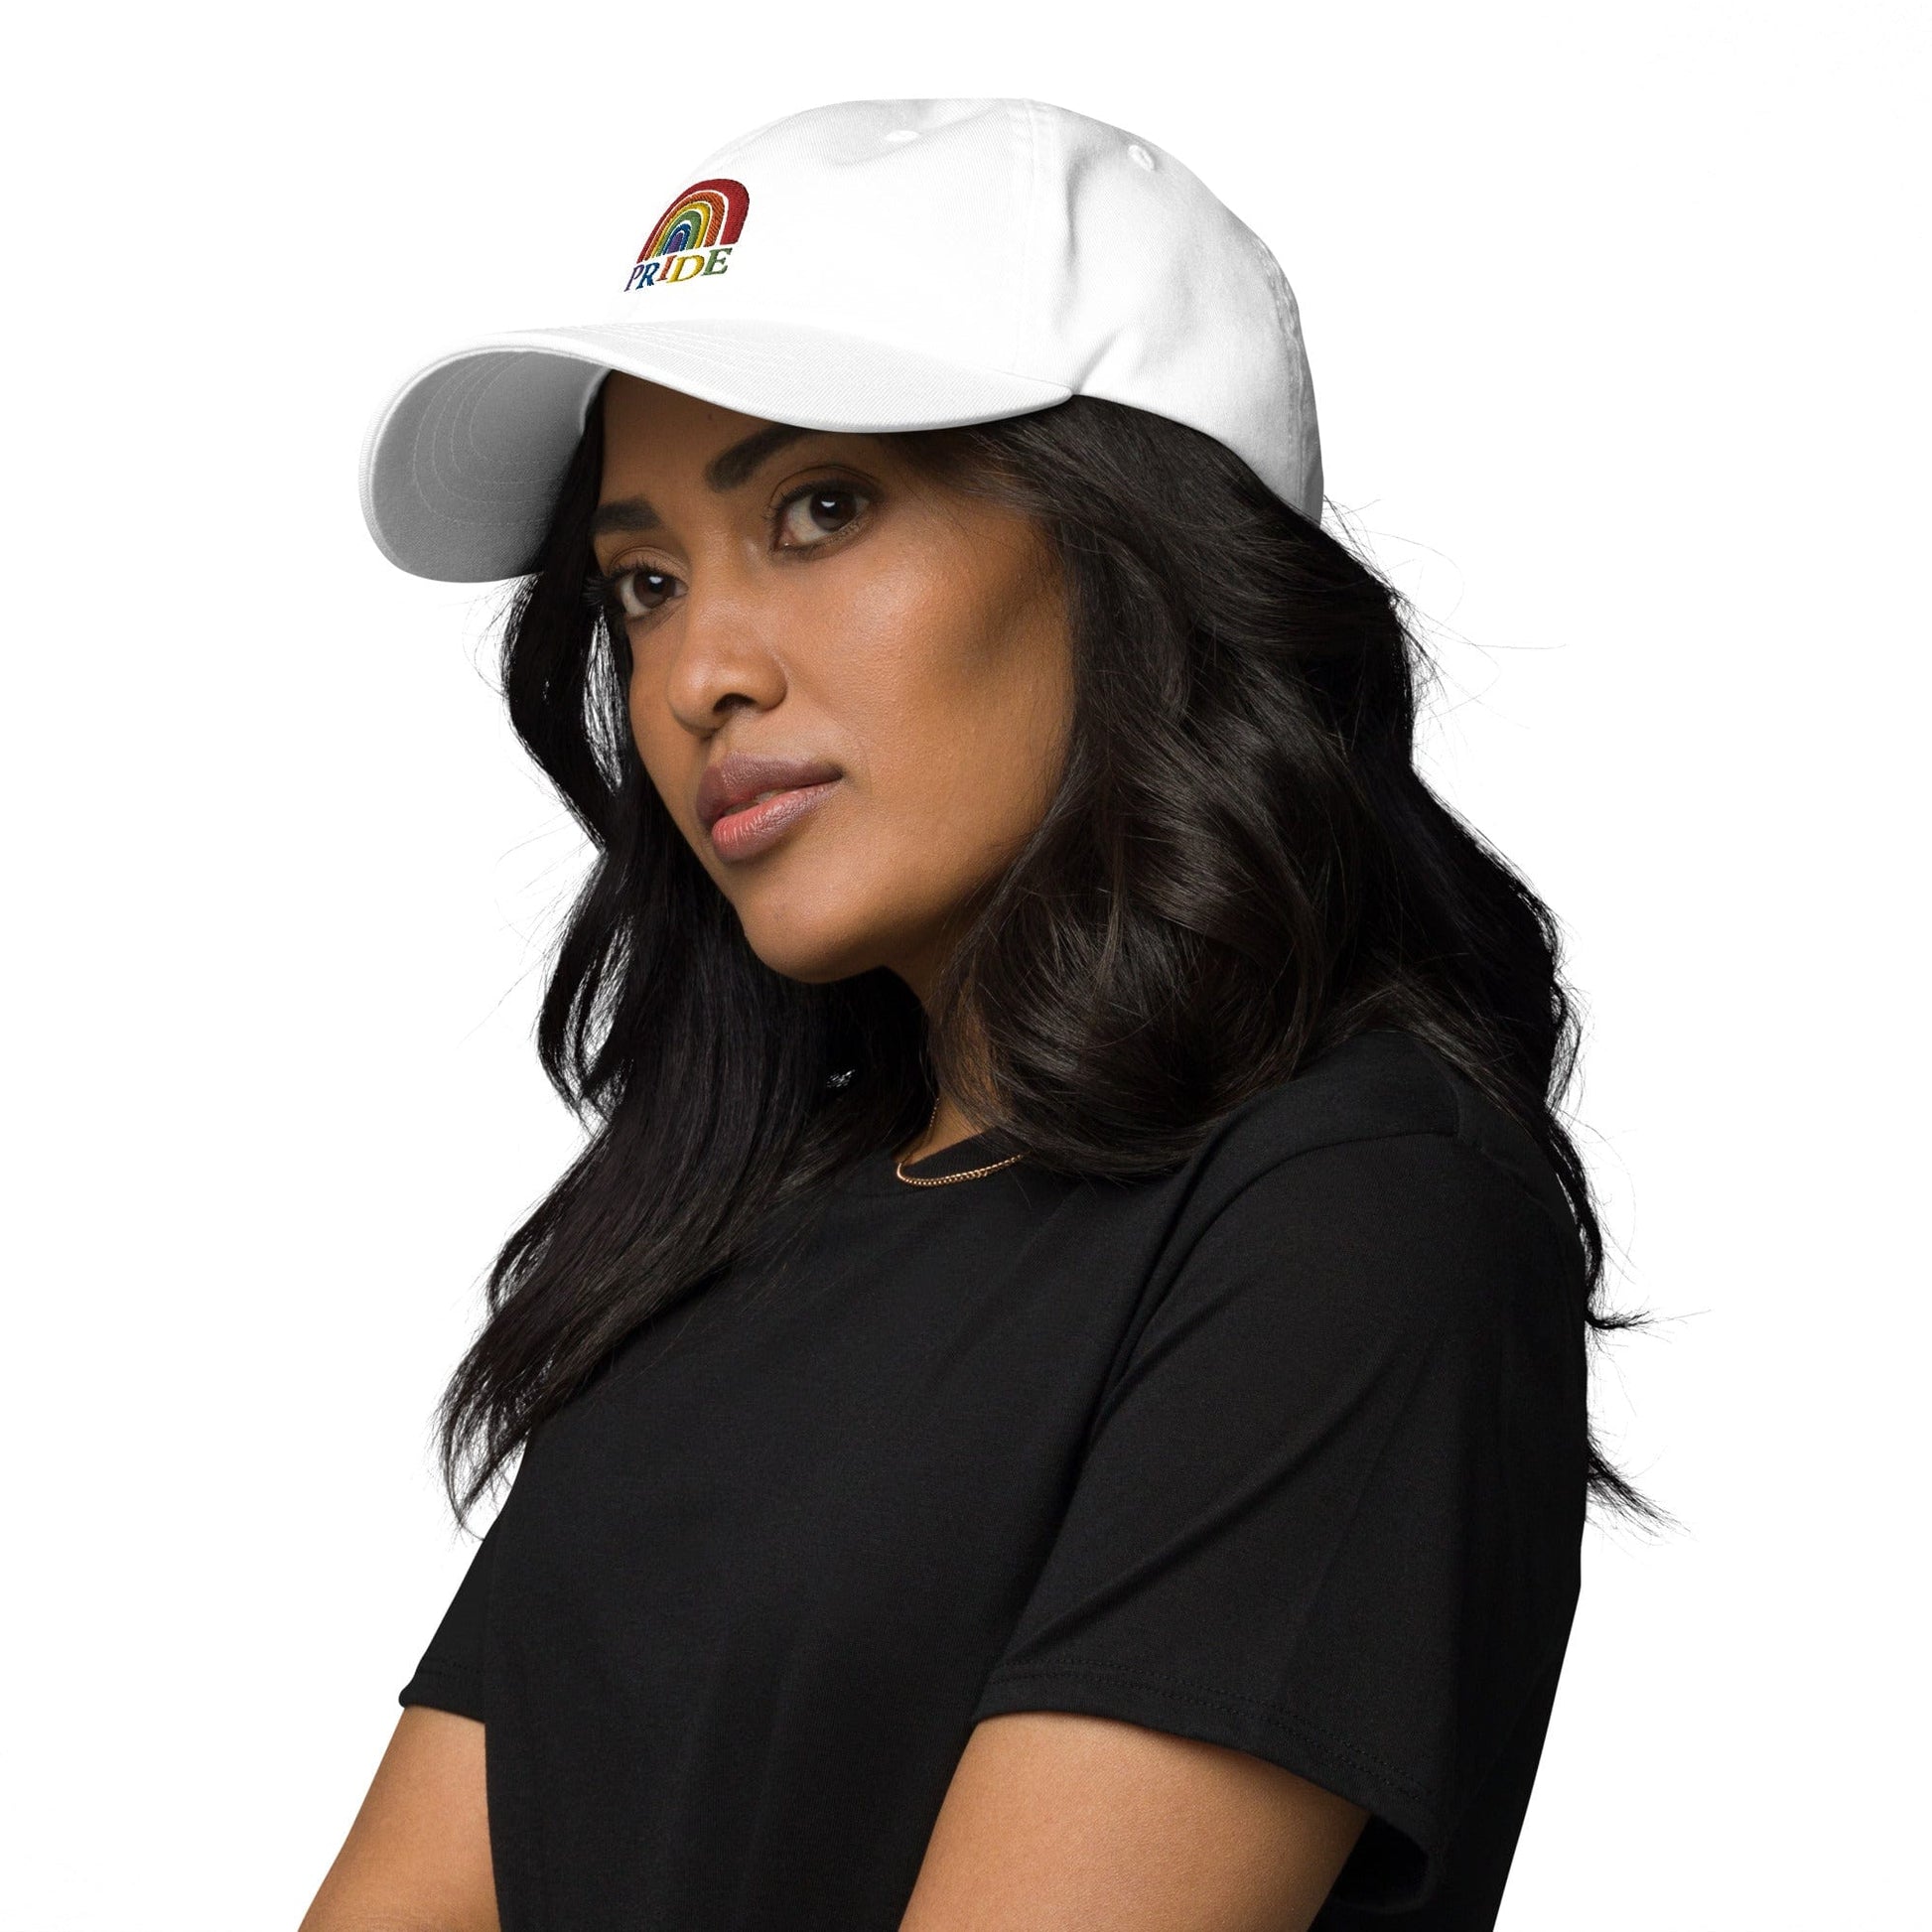 mockup-woman-wearing-embroidered-pride-cap-white-left